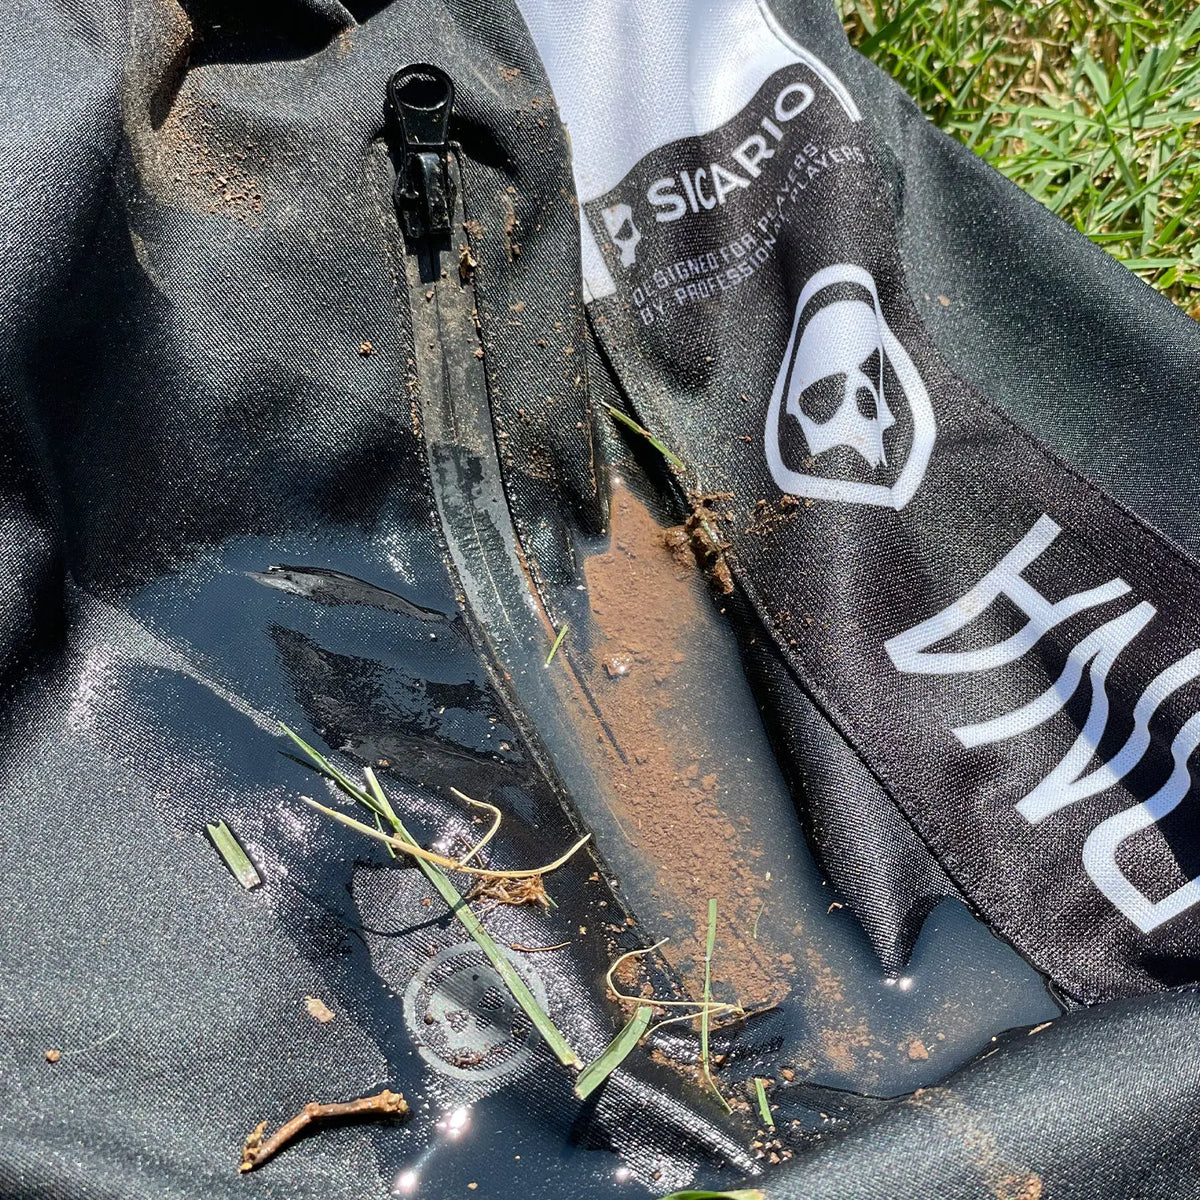 PRO-ACP JOGGERS - PRO DNA Infamous Paintball